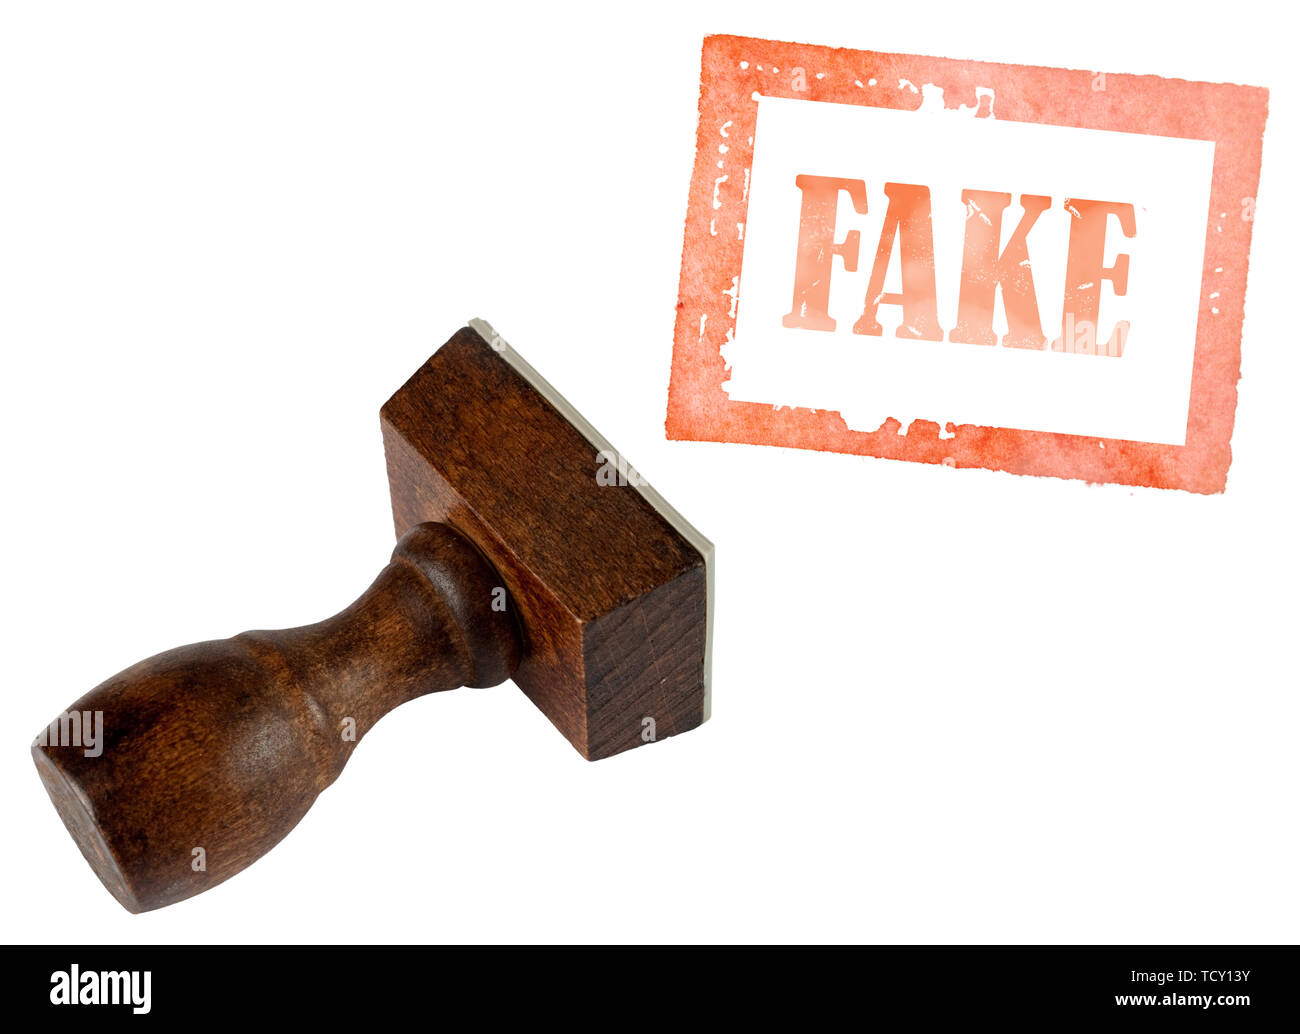 Genuine fake, rubber stamp isolated on white. Business, politics or trade ethical concept. Stock Photo